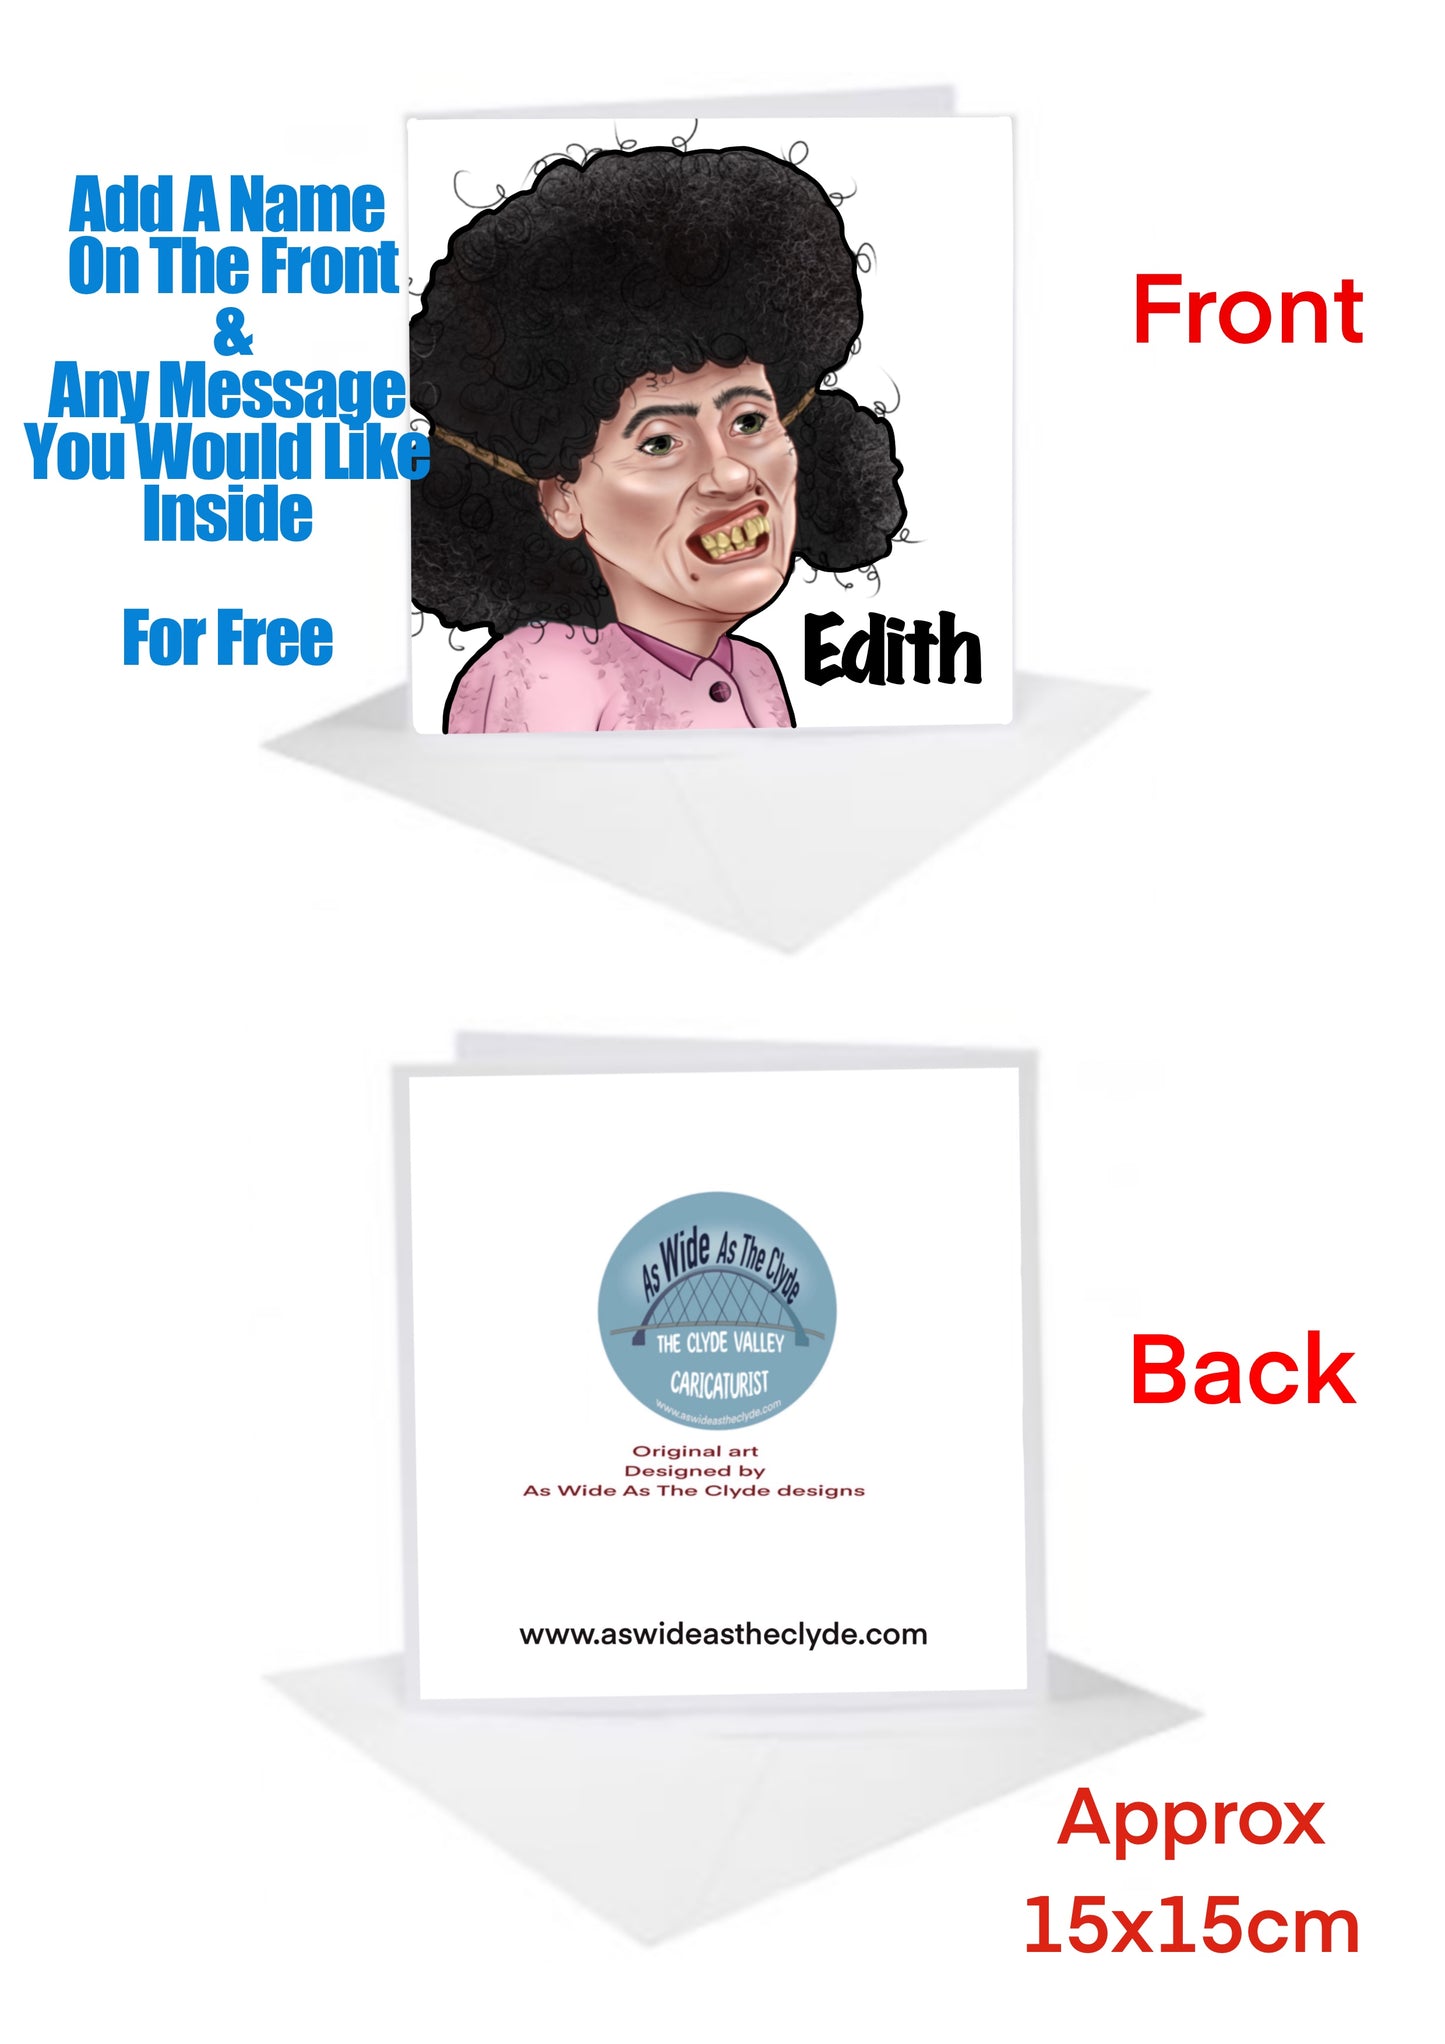 Edith Still Game Cards-Cards #stillgame #scottish #edith add details for free